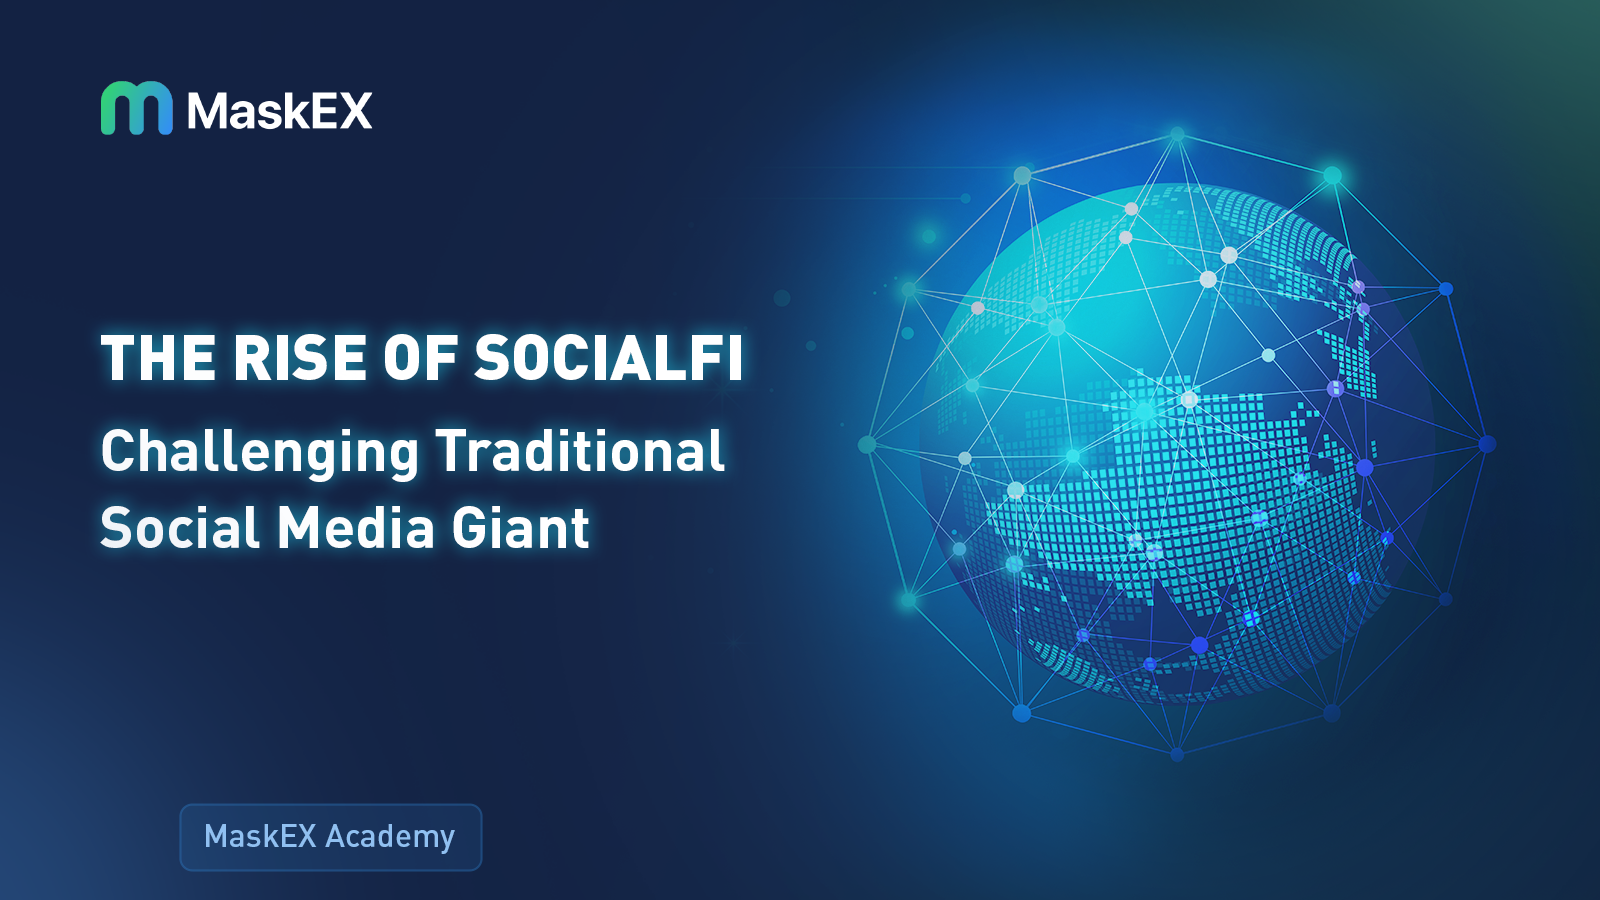 The Rise of SocialFi: Challenging Traditional Social Media Giants